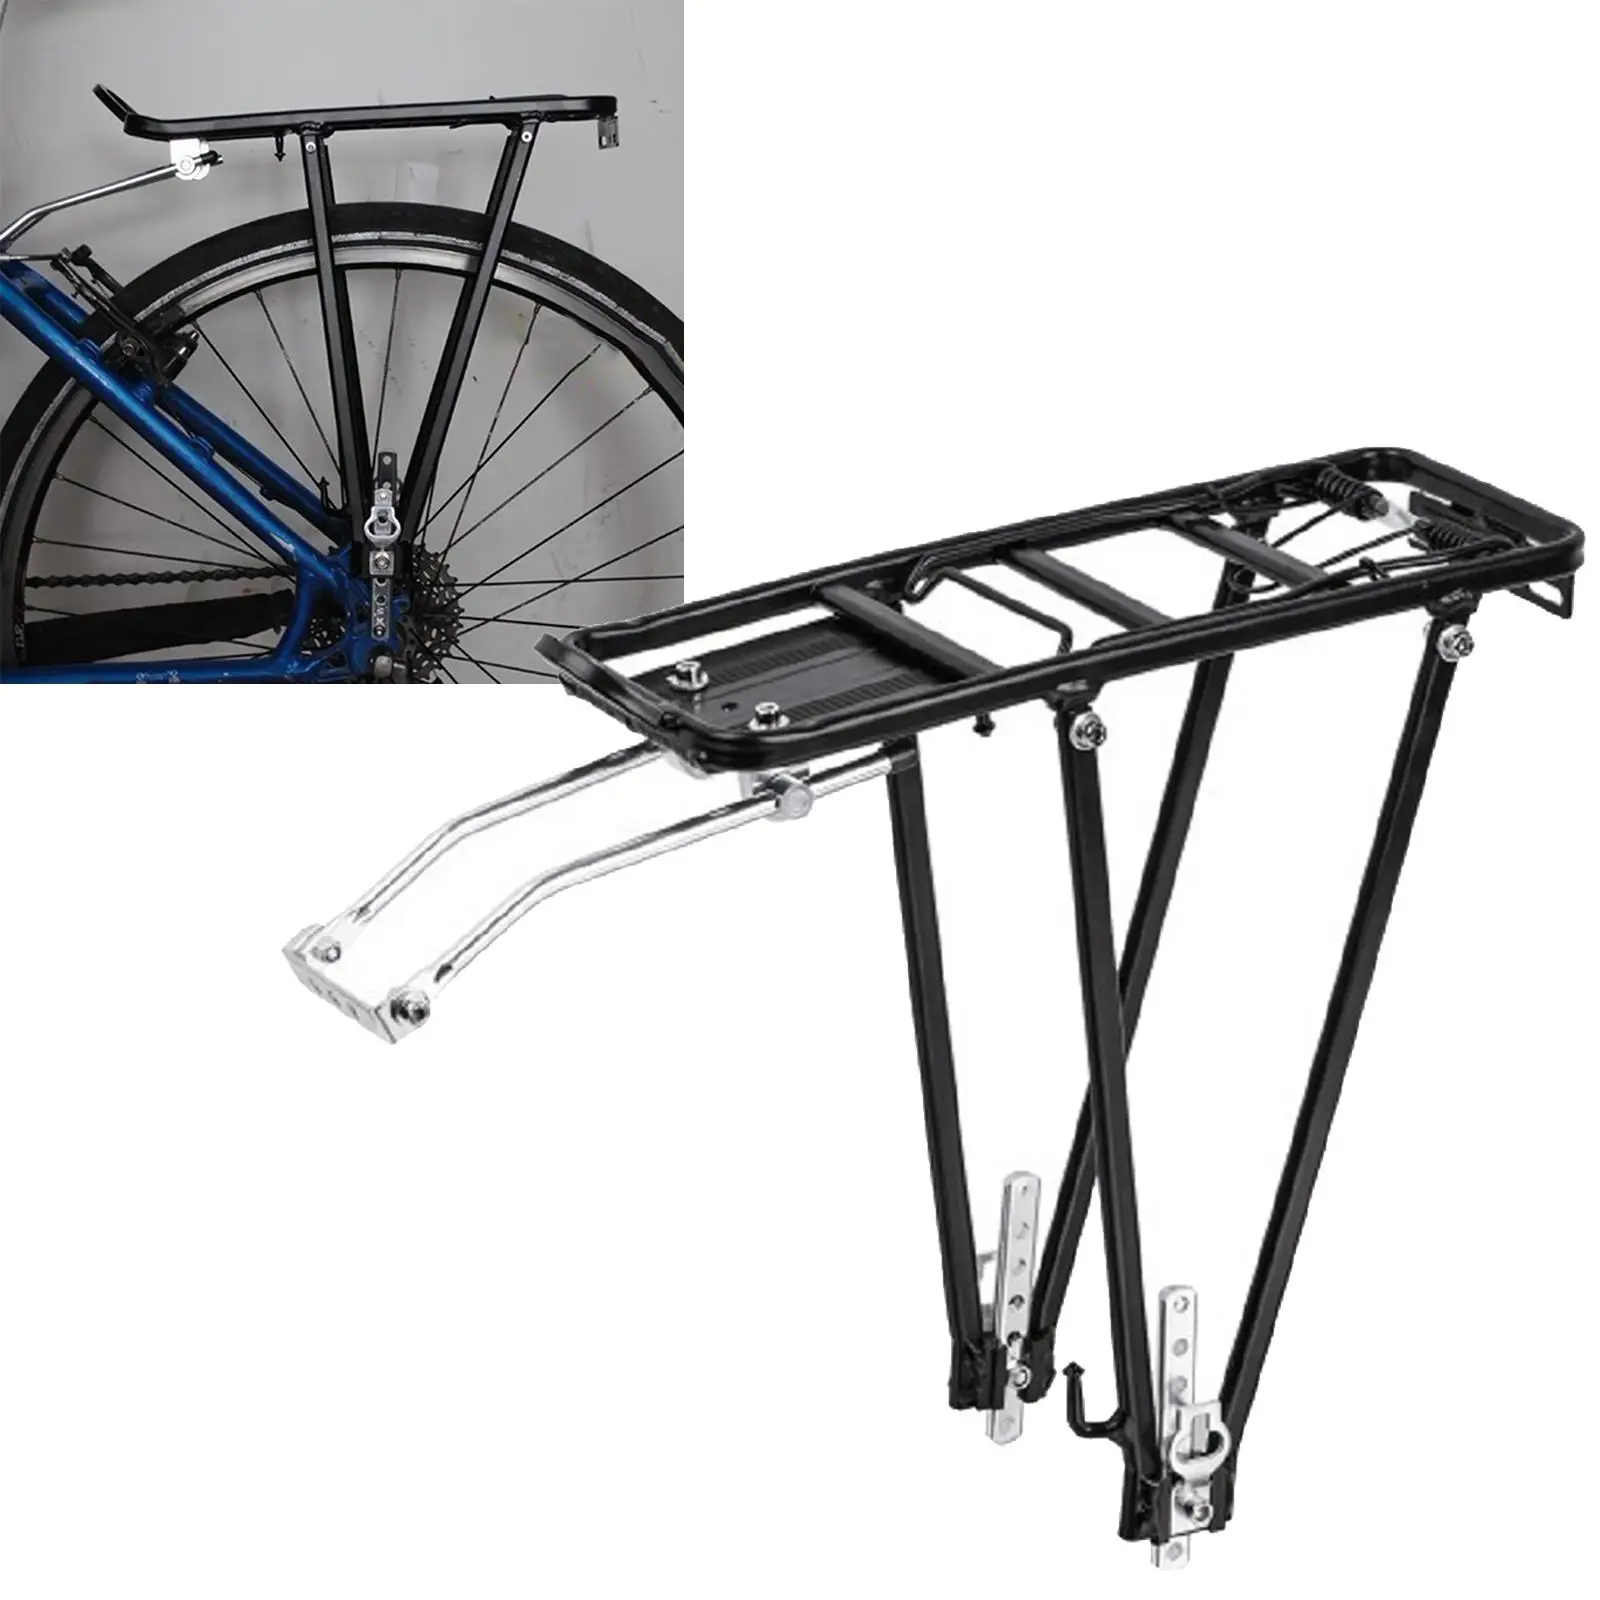 Rear Bike , Aluminum Alloy Pannier Rack for Touring Cycling Mountain Road Bikes, Road  Install